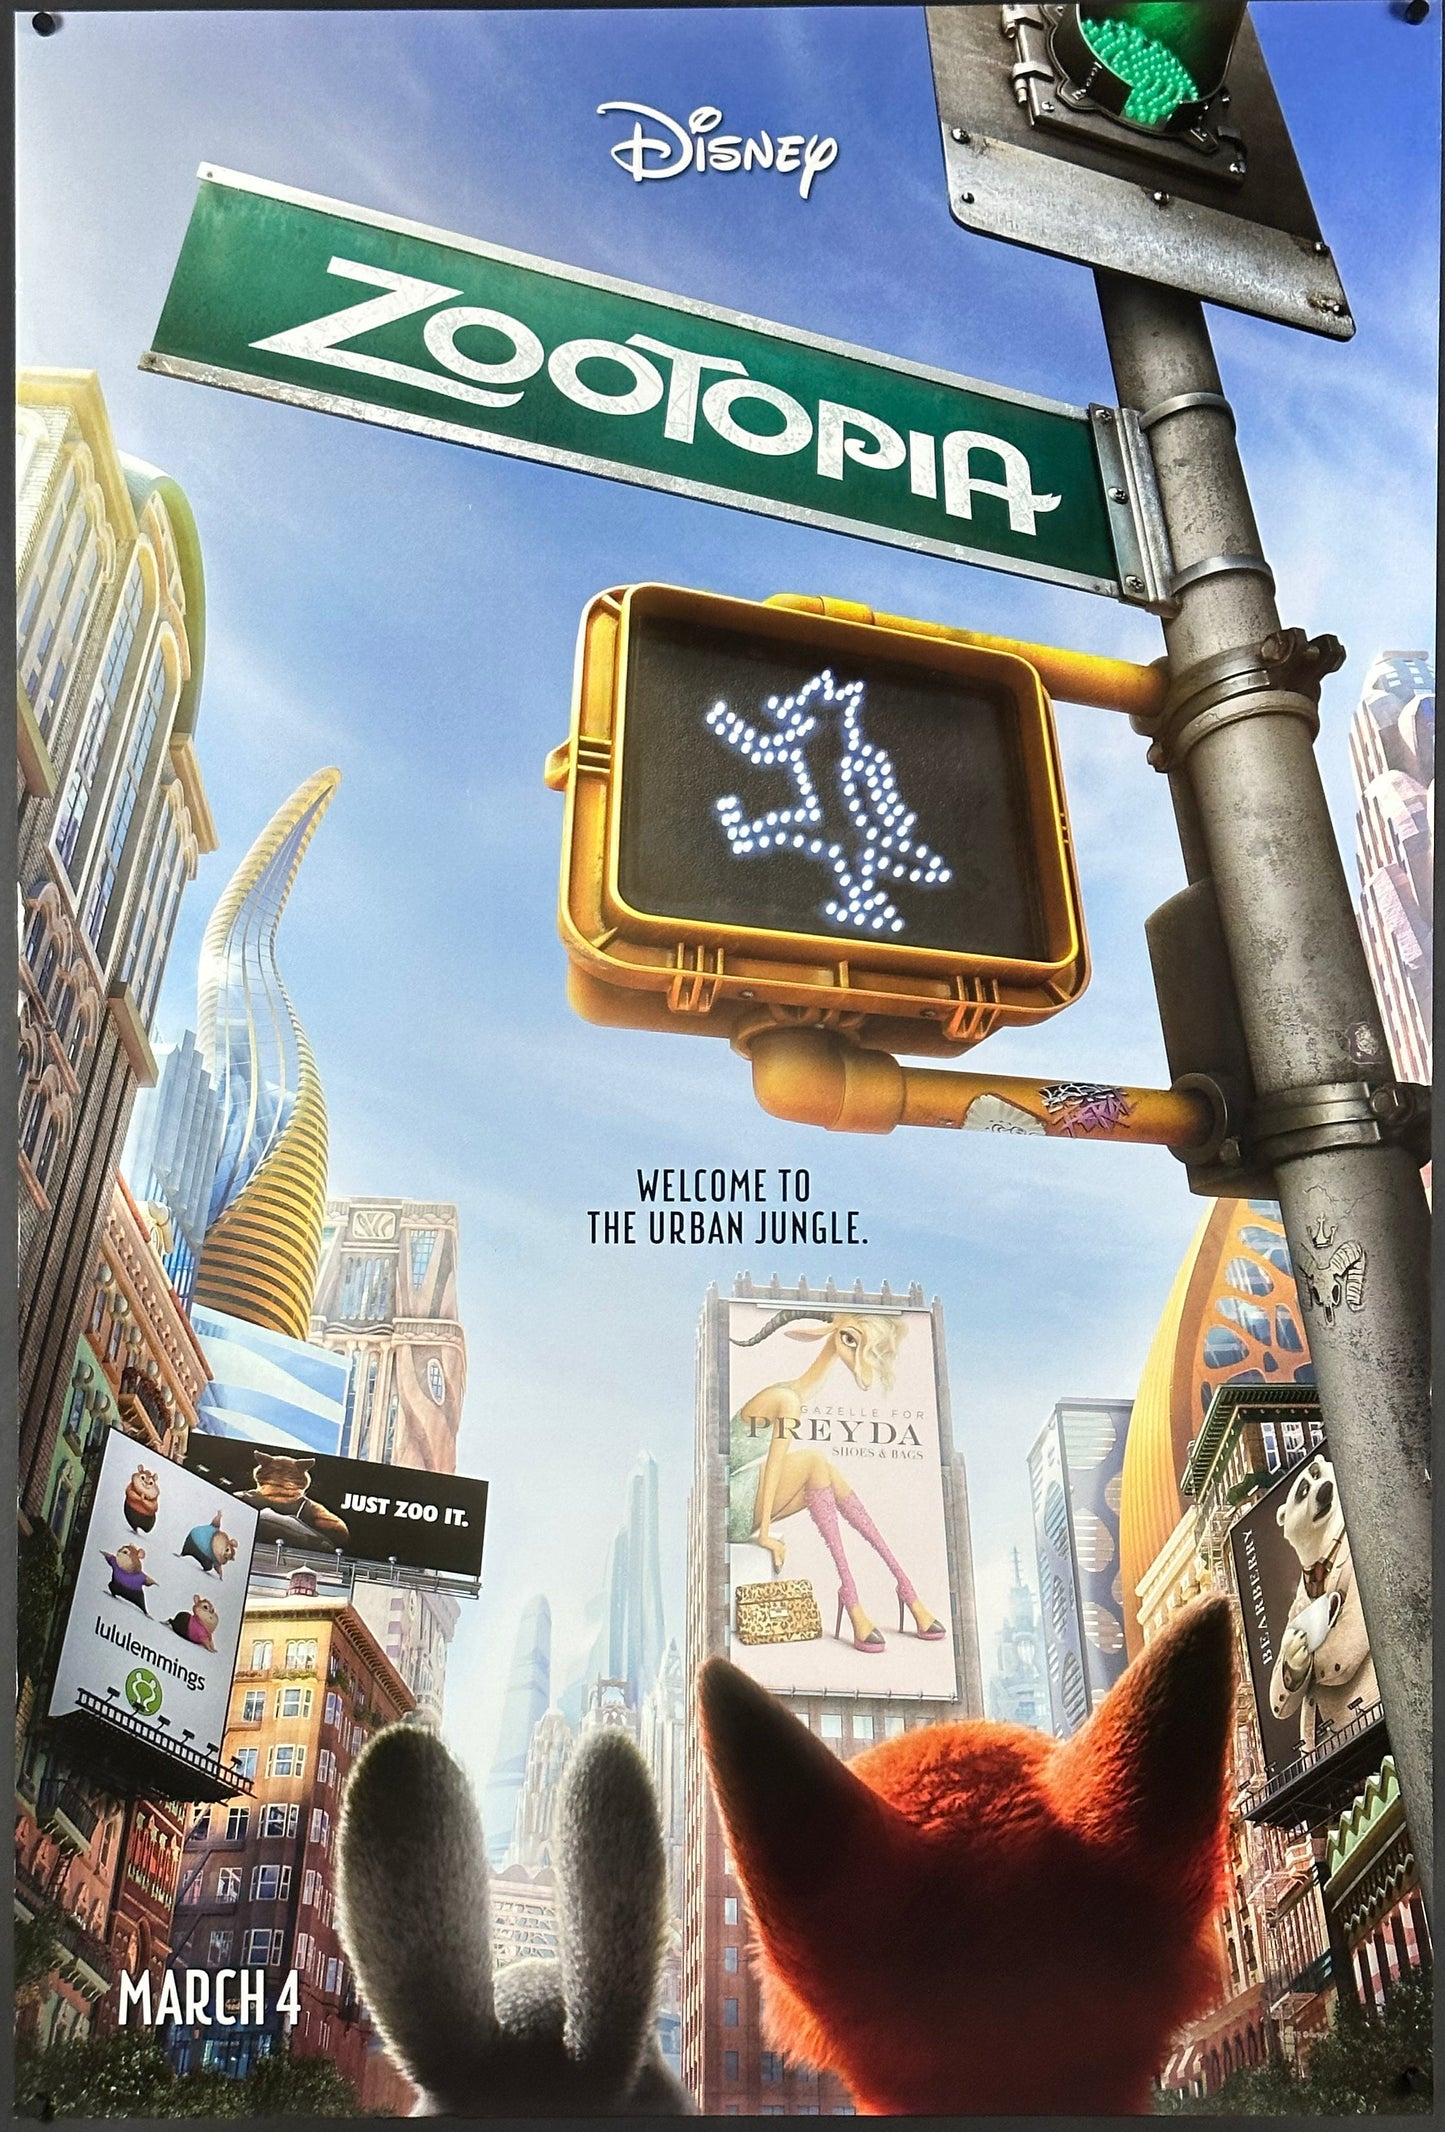 Zootopia US One Sheet Teaser Style (2016) - ORIGINAL RELEASE - posterpalace.com